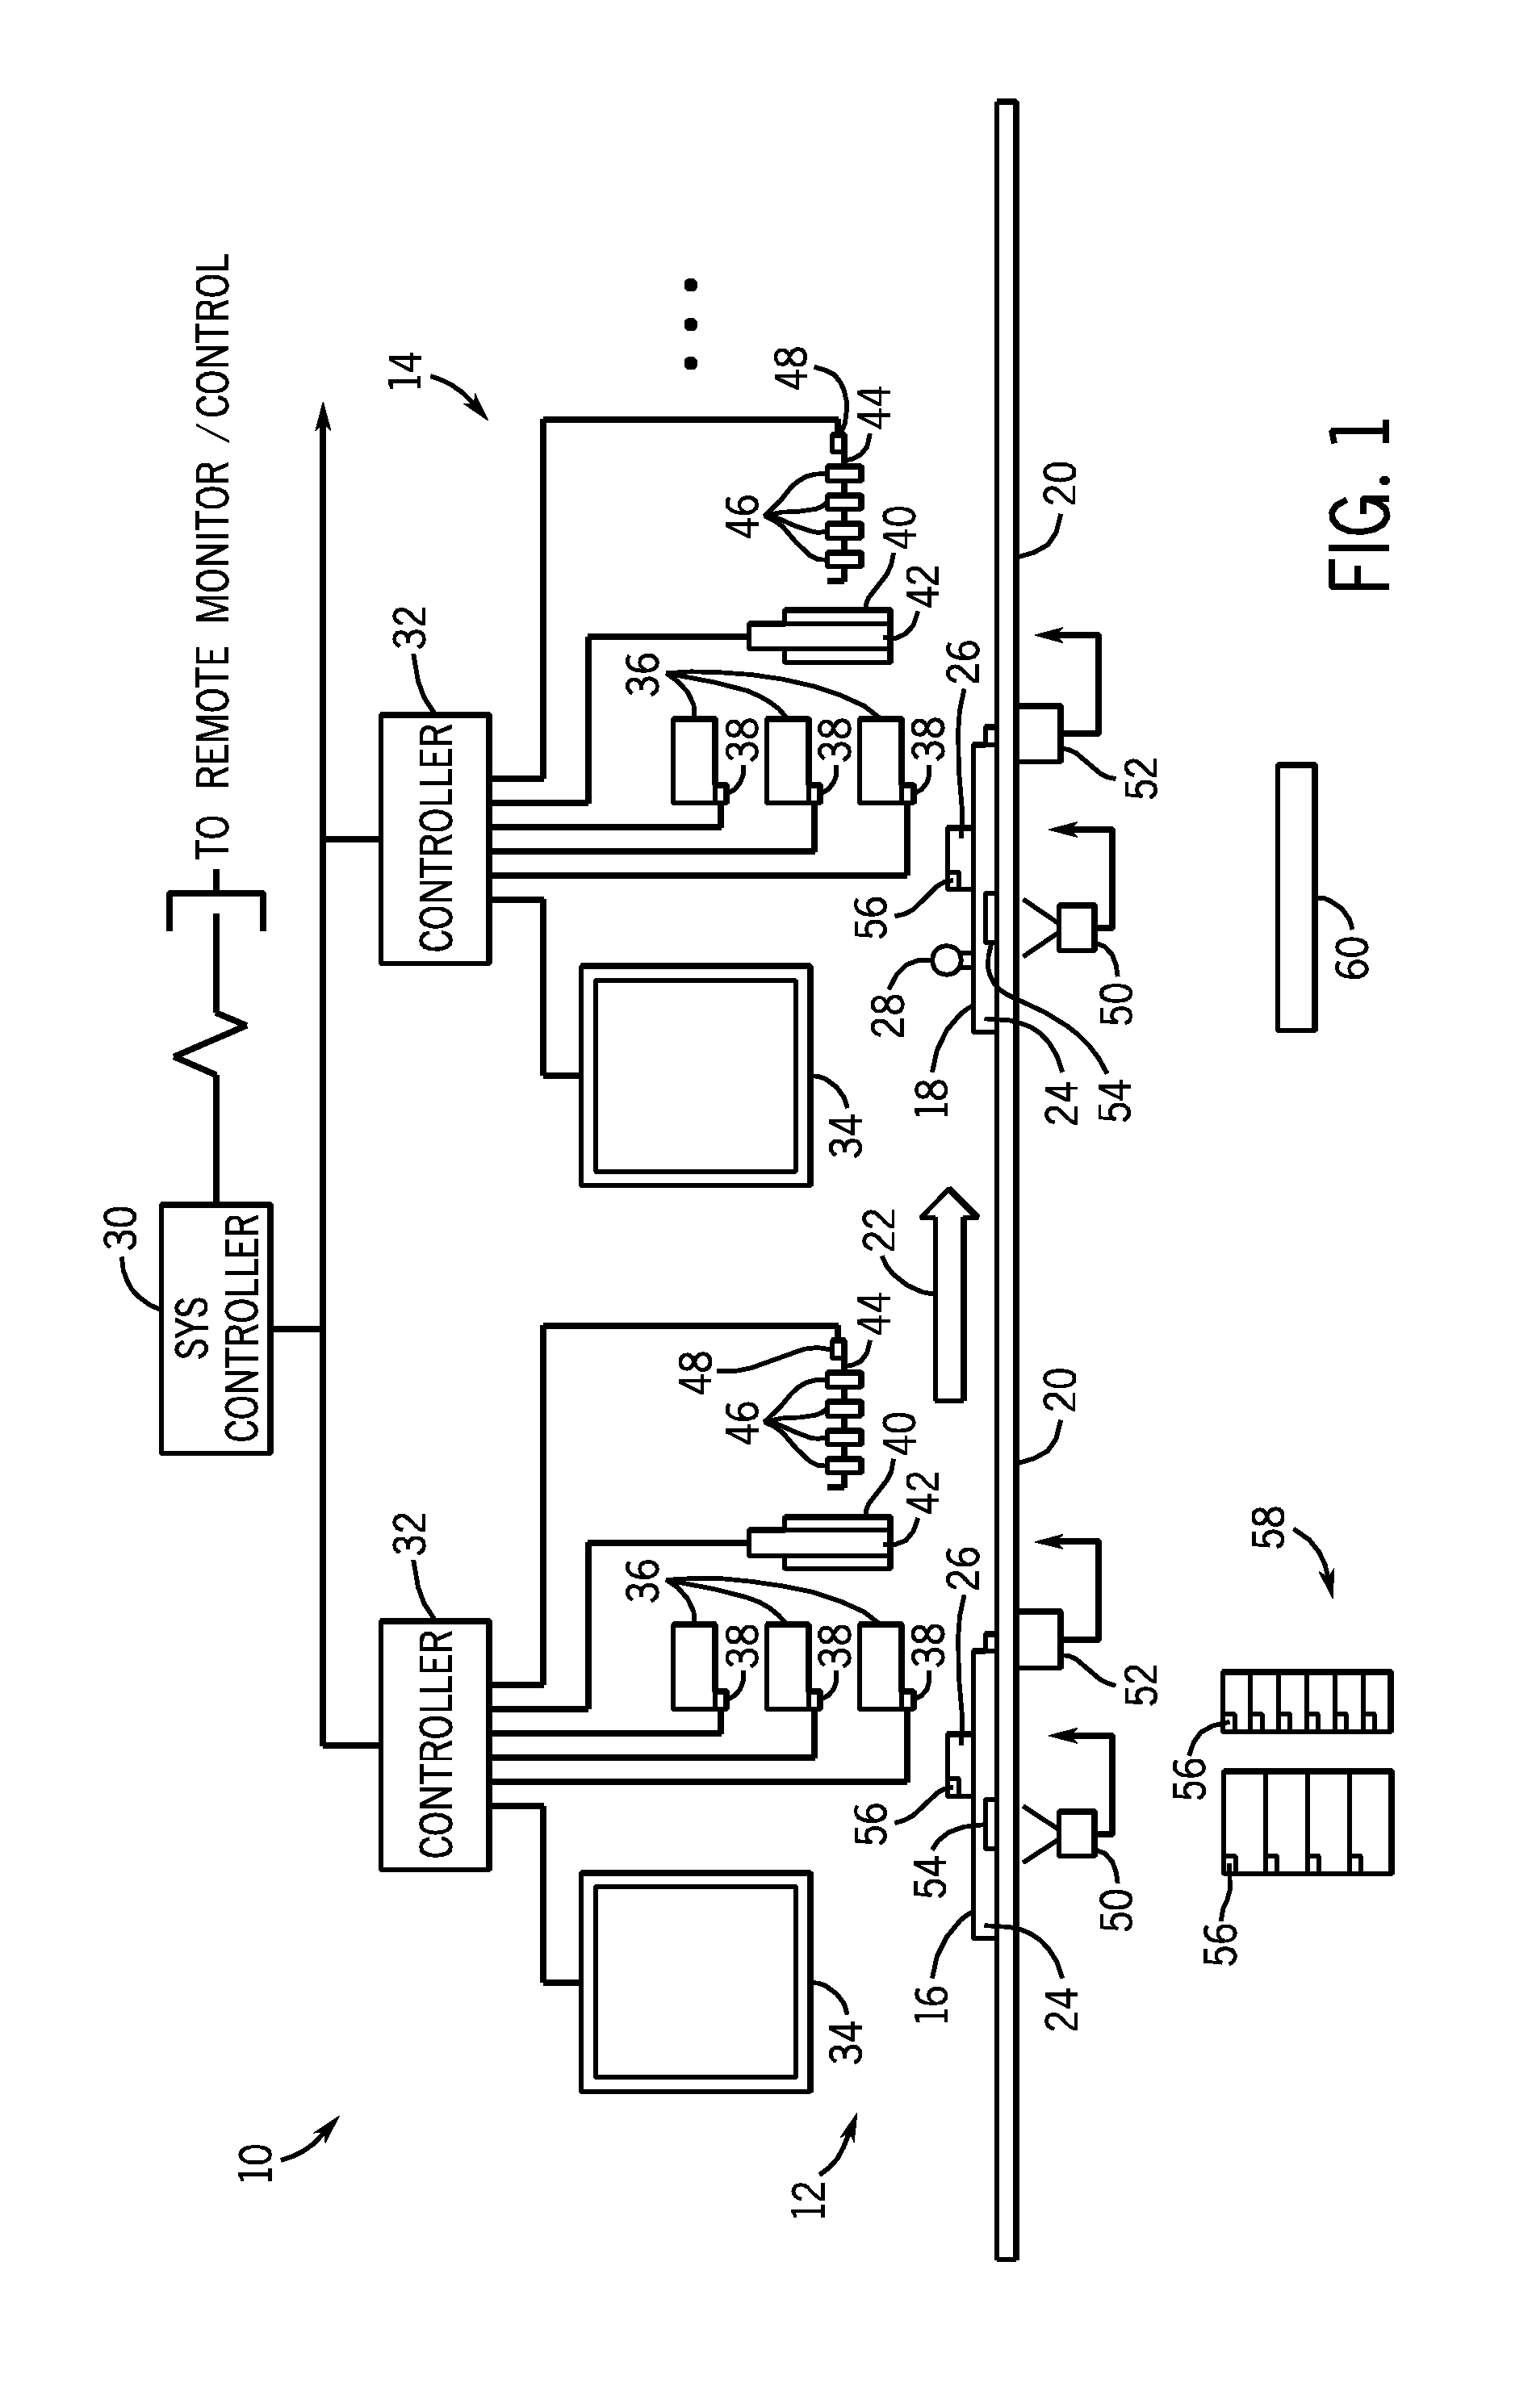 Integrated menu-driven manufacturing method and system